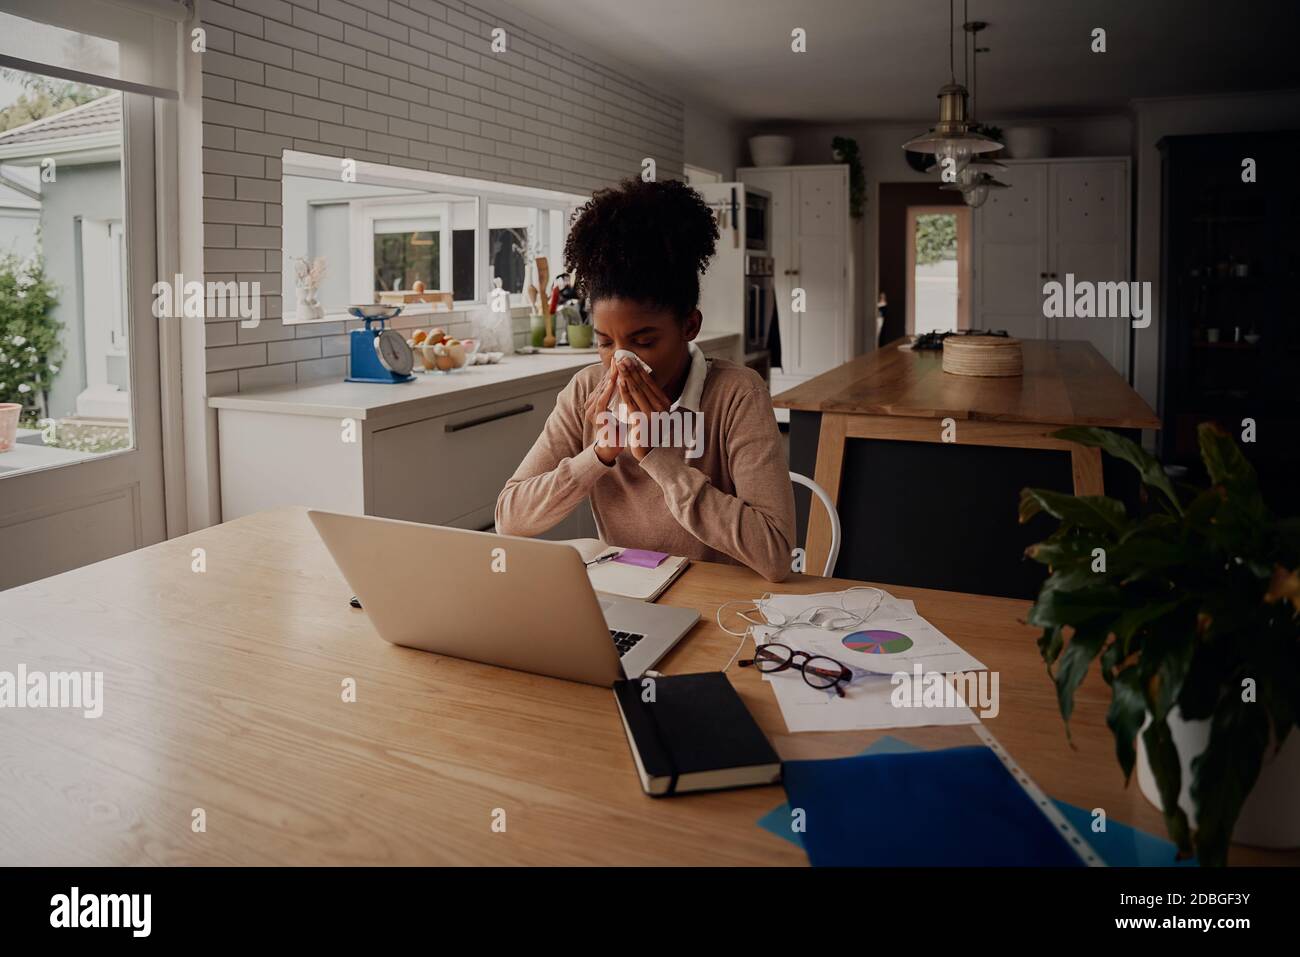 Woman sitting alone blowing nose while using laptop during work from home Stock Photo